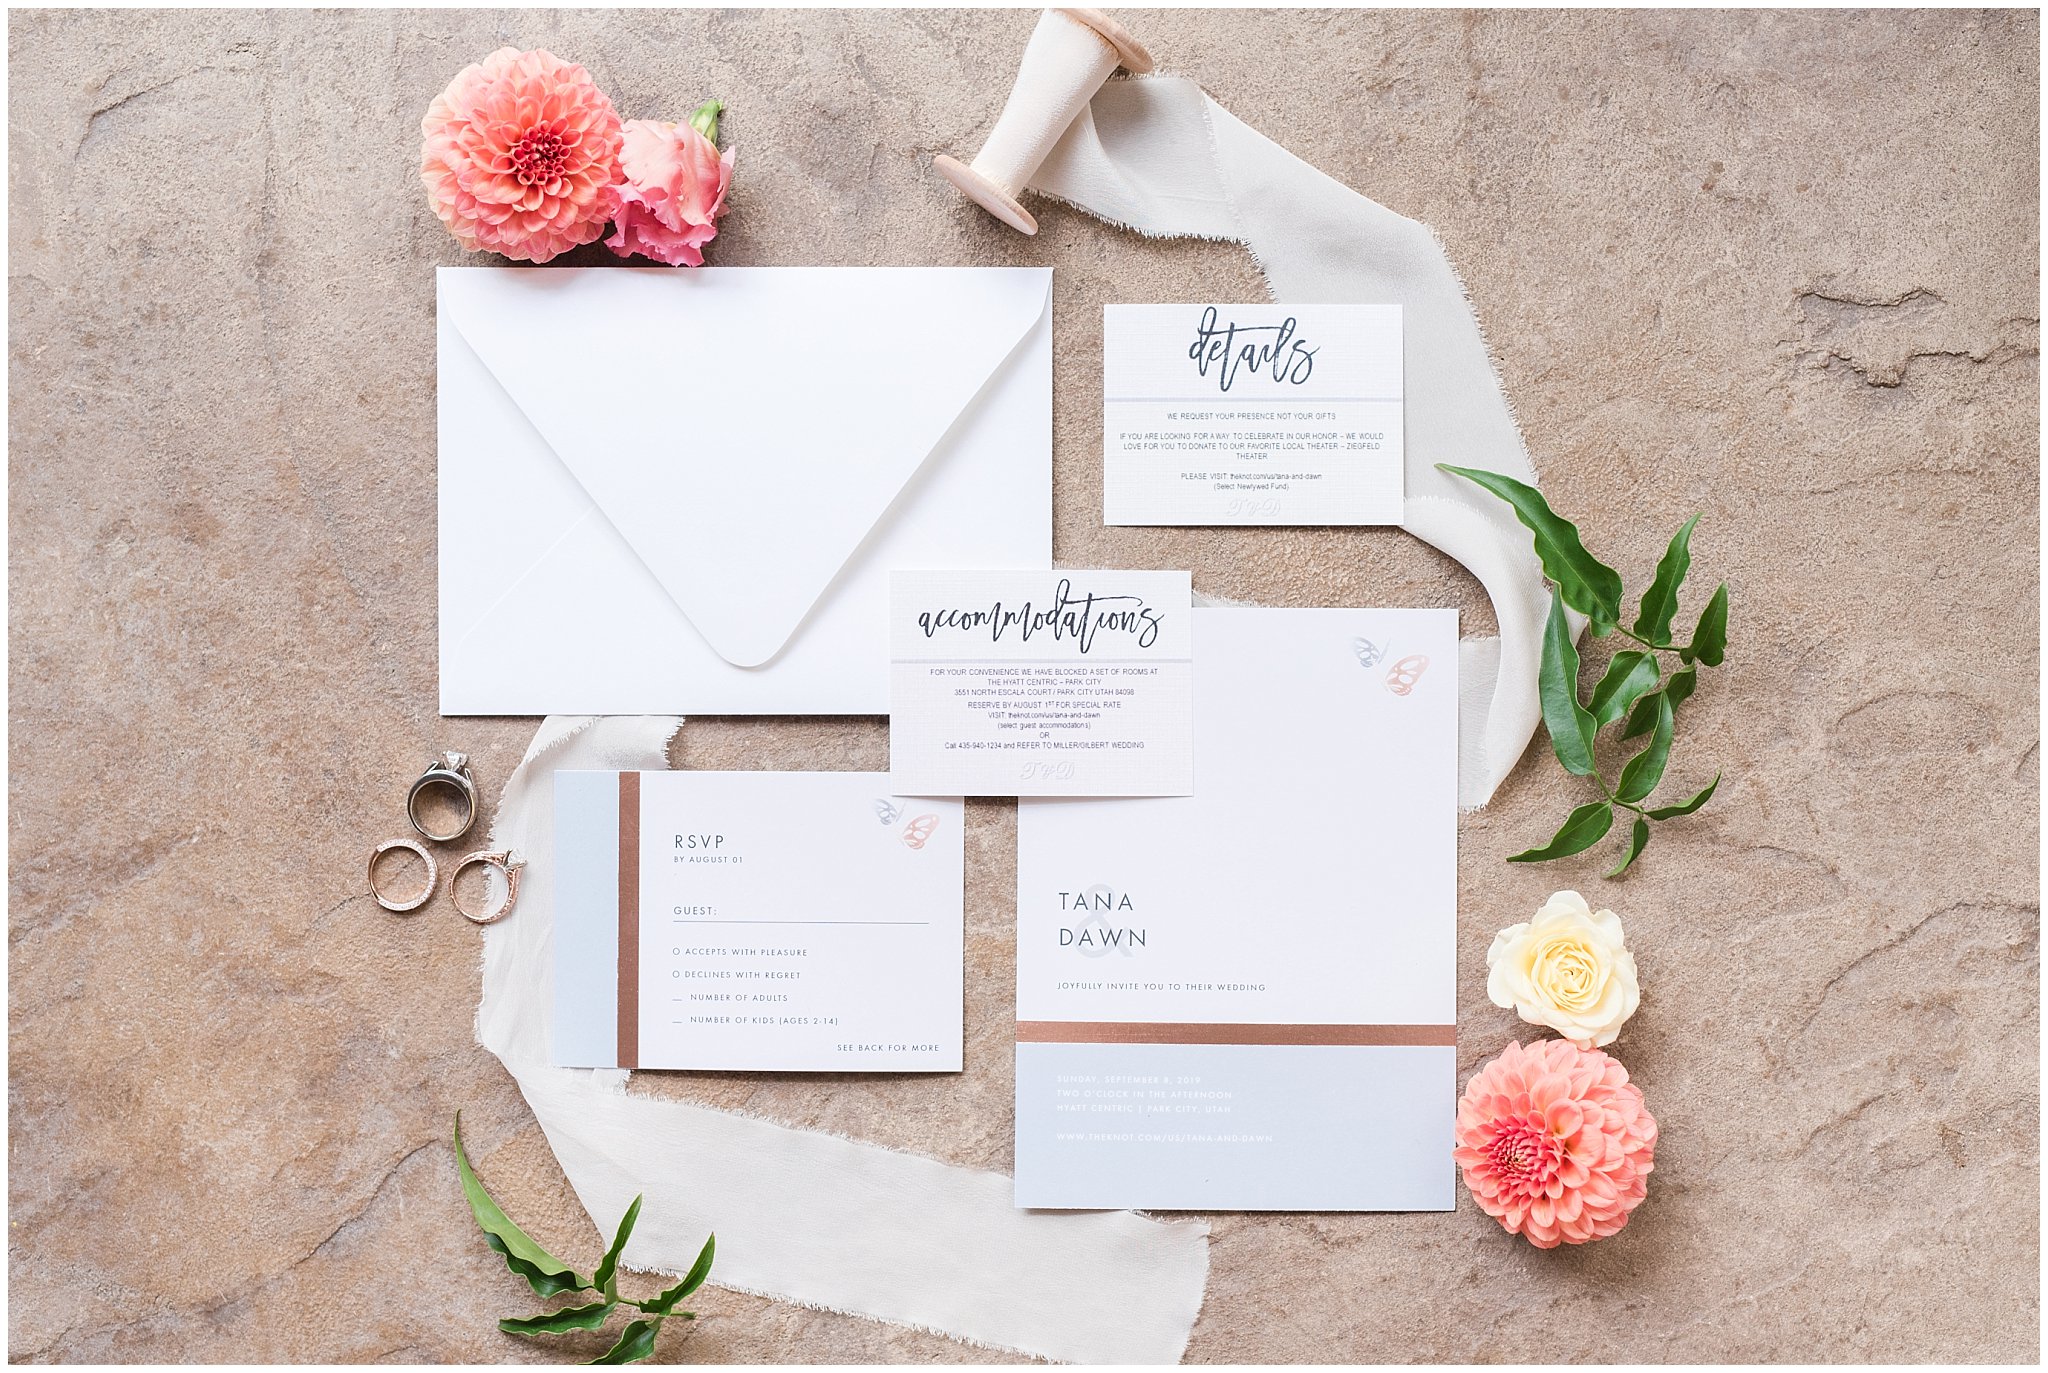 Invitation suite on stone | Park City Wedding at the Hyatt Centric | Jessie and Dallin Photography